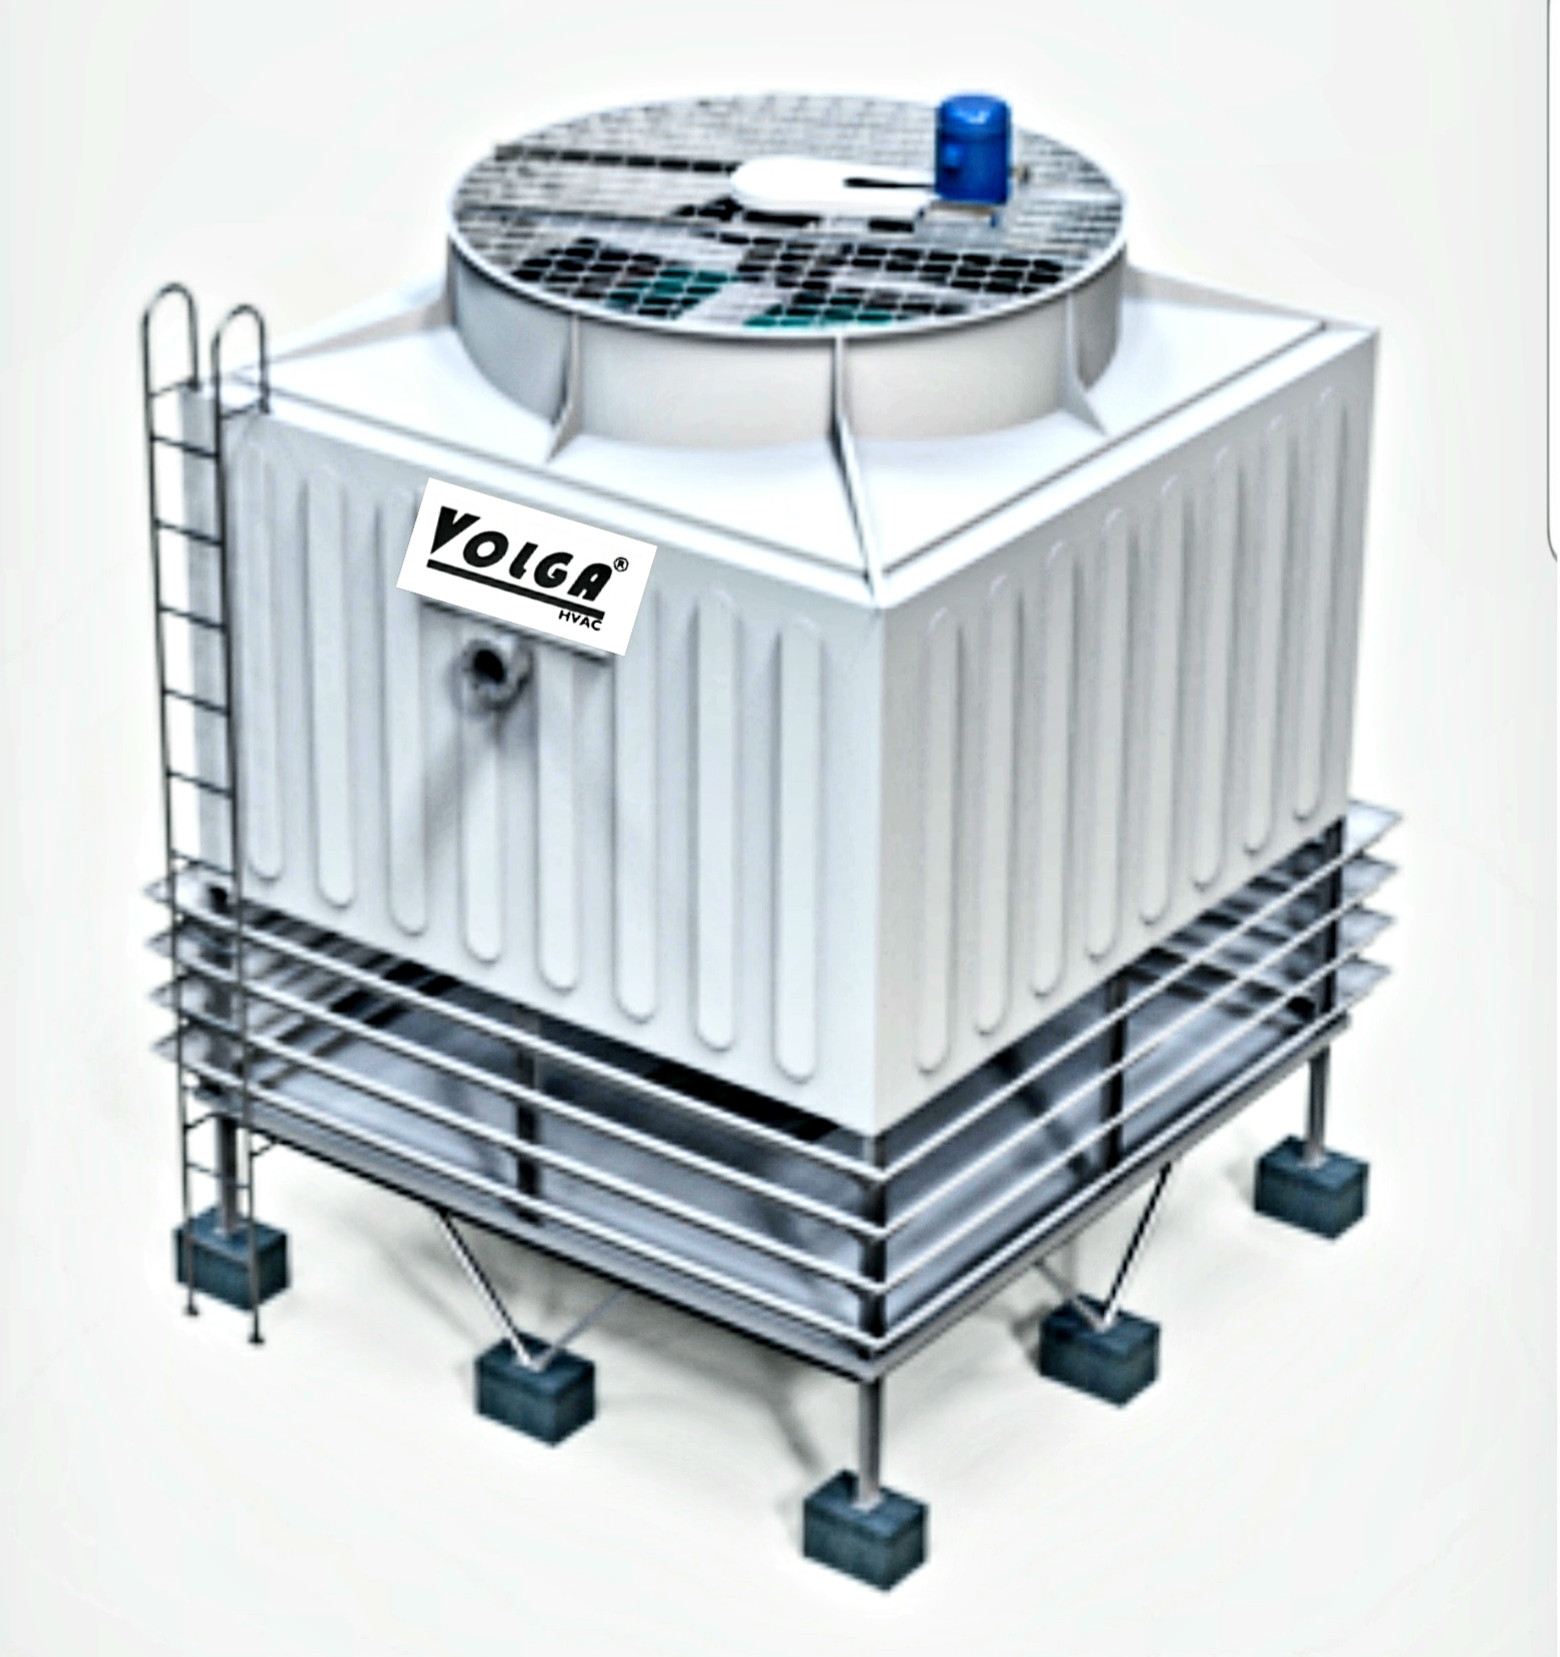 VST Series Square Cooling Tower   